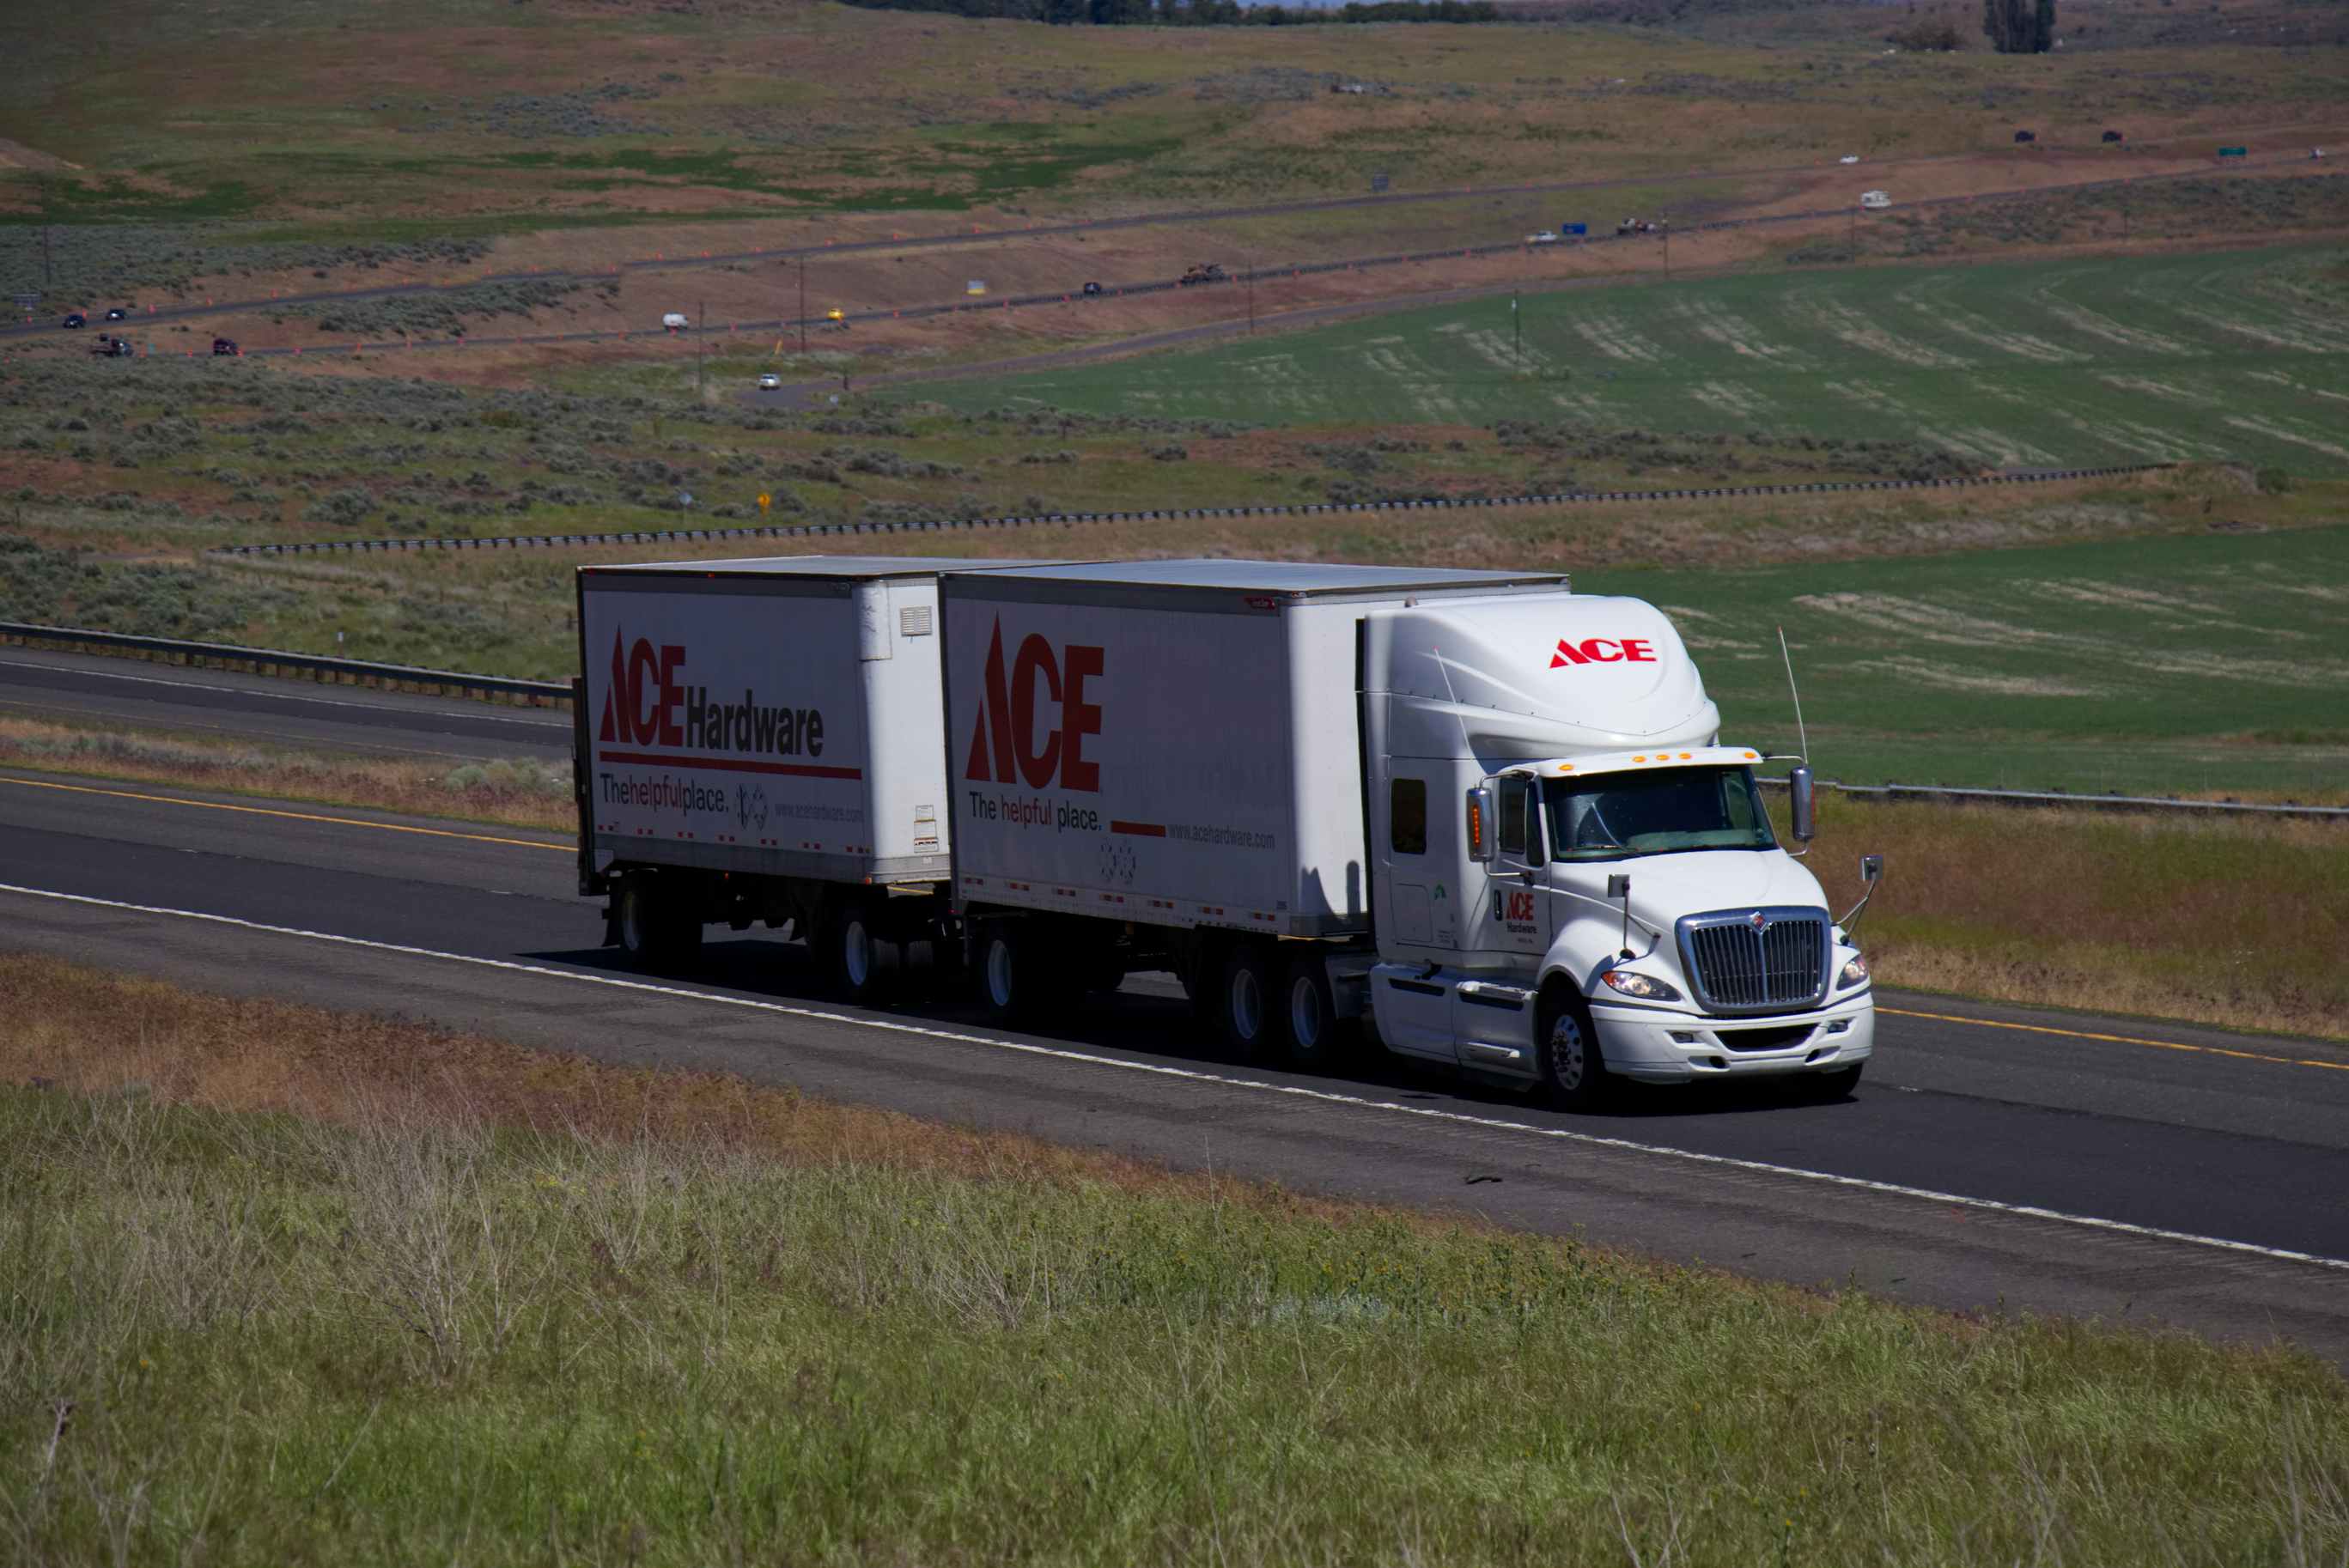 A large ace hardware truck driving down a road in a deserted area